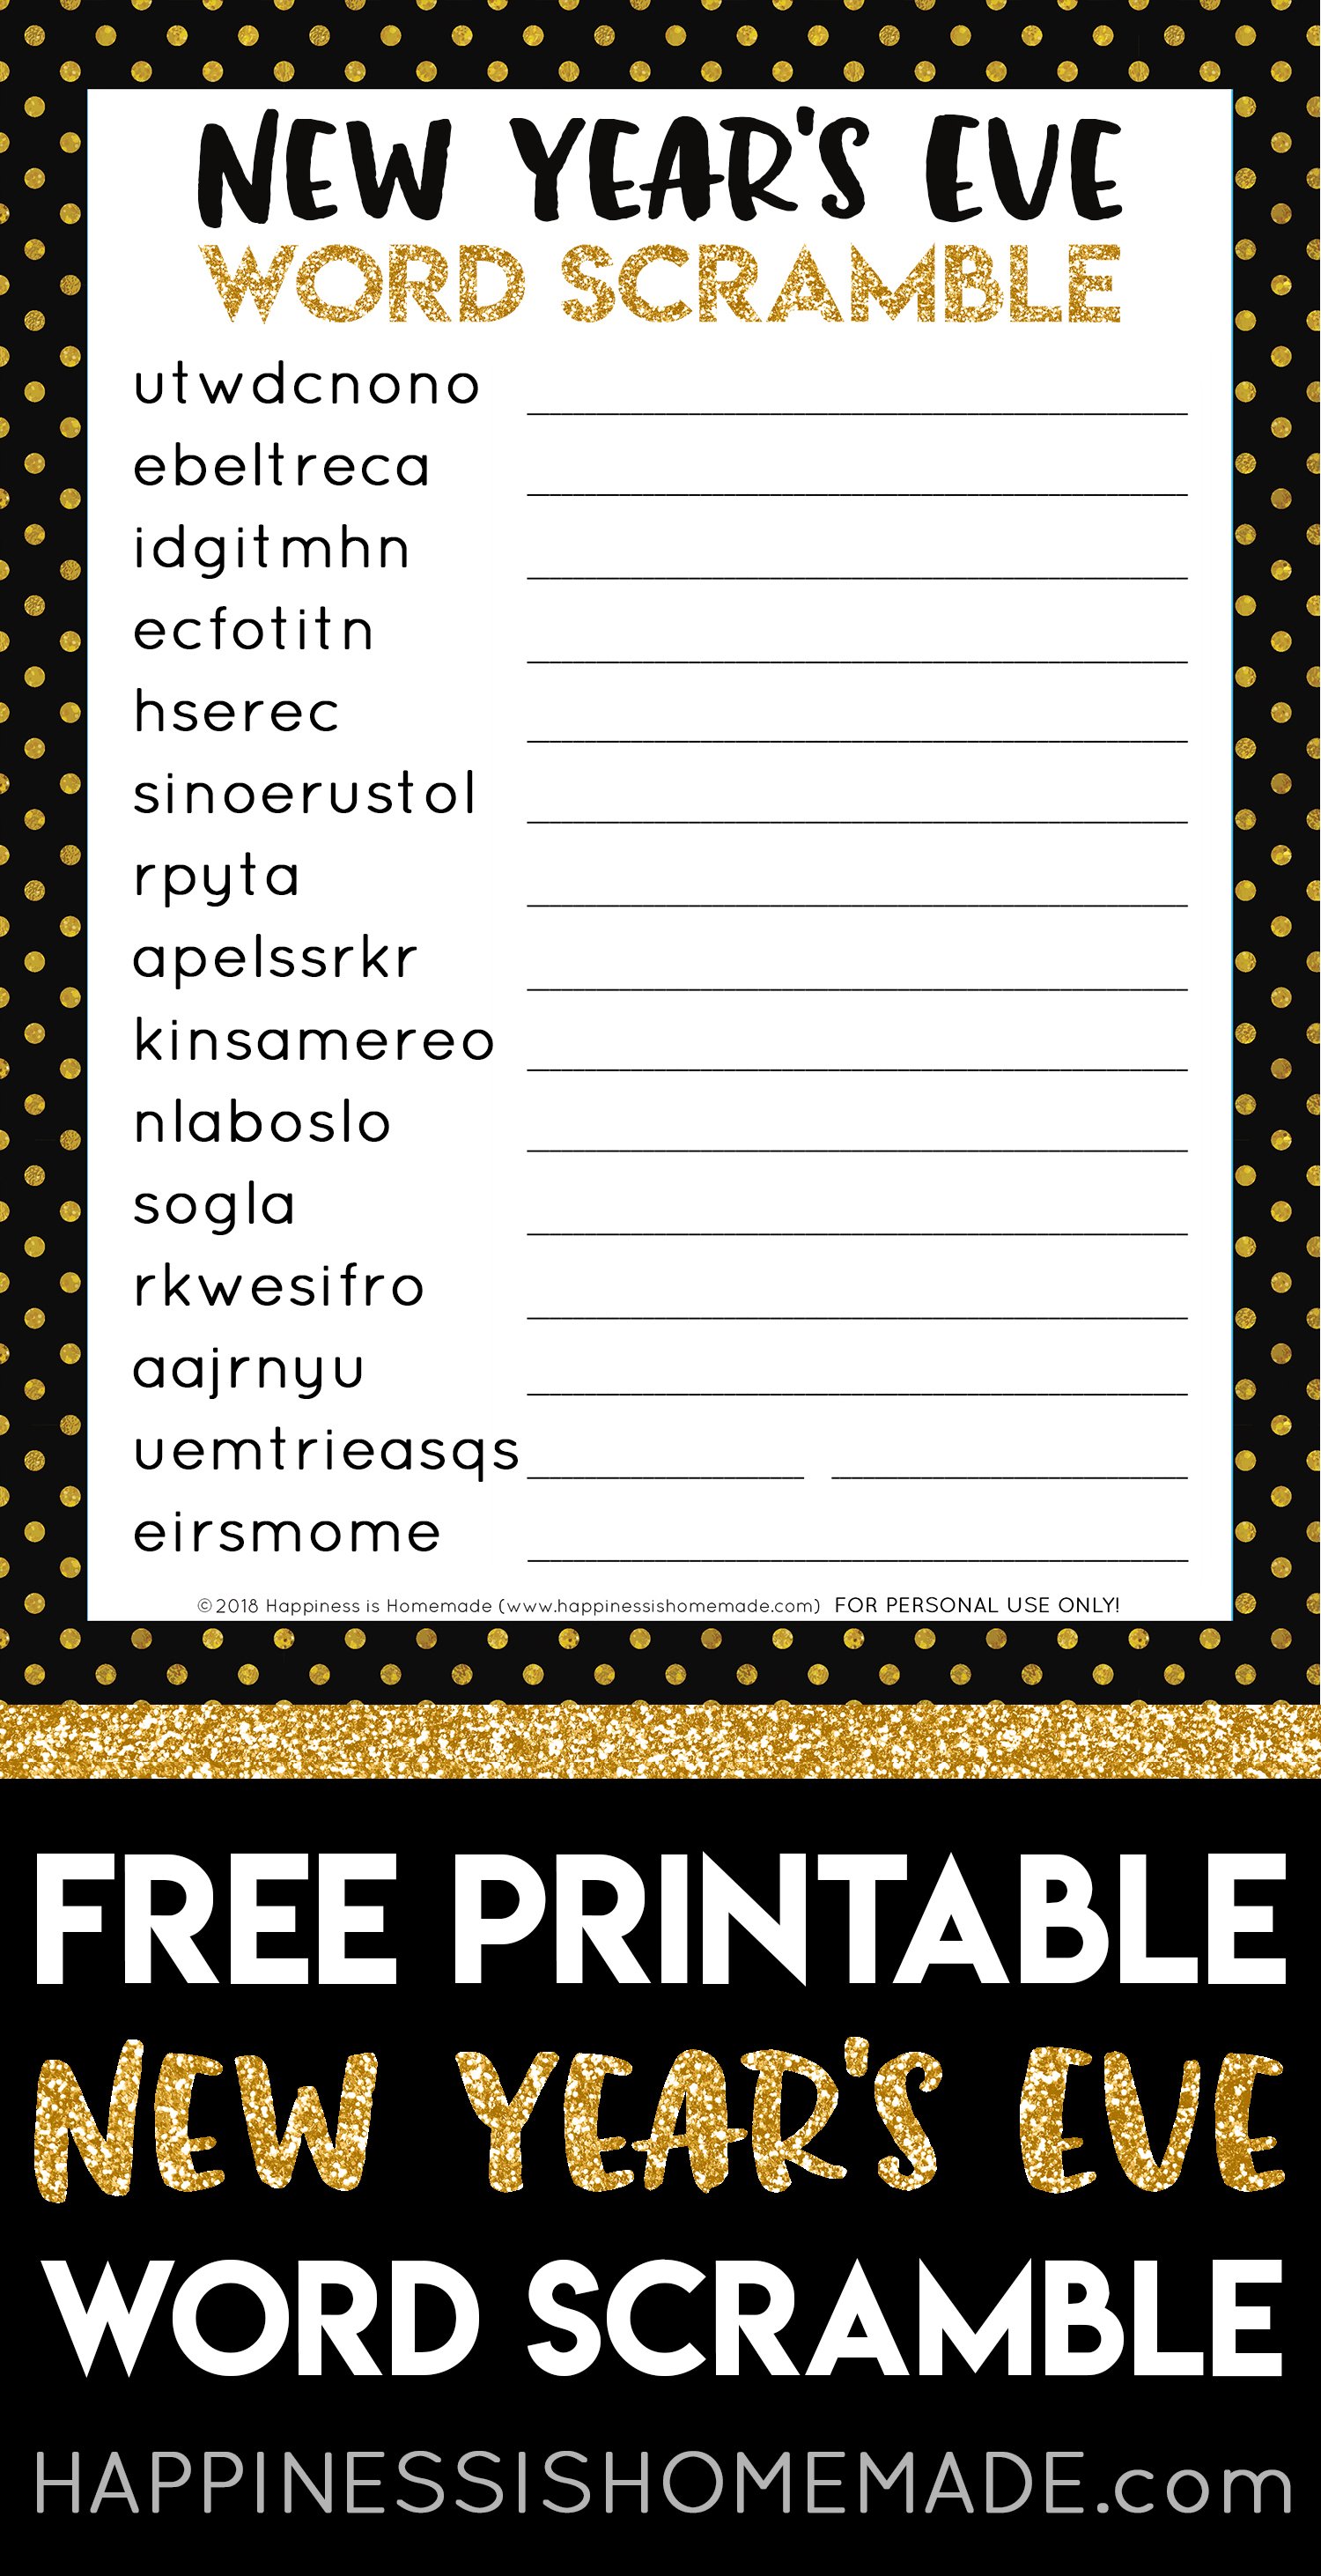 New Year's Eve Word Scramble Printable Happiness is Homemade